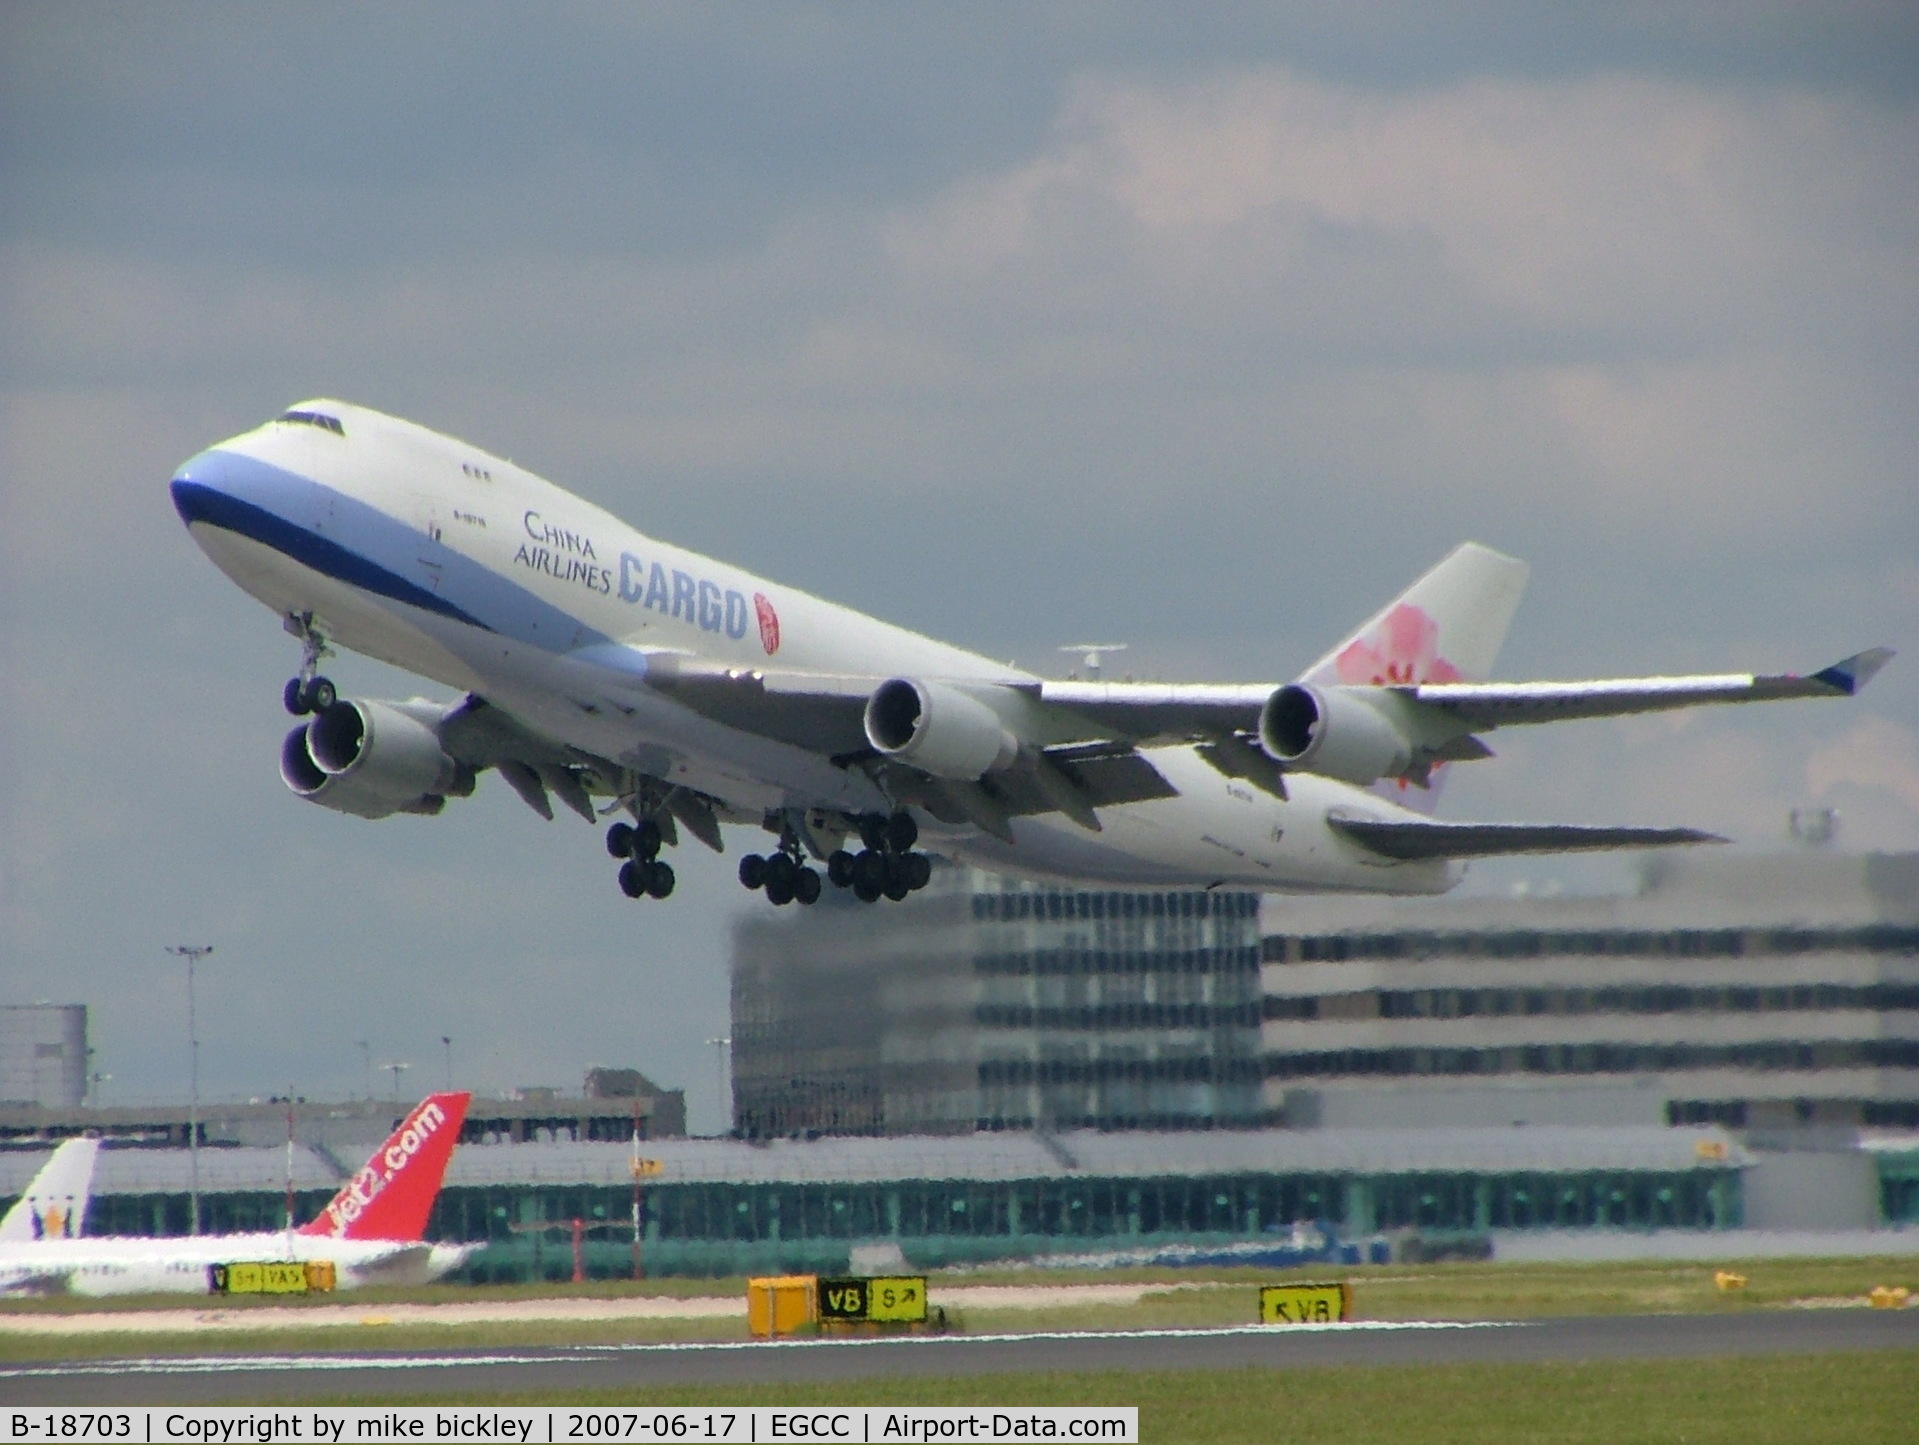 B-18703, 2000 Boeing 747-409F/SCD C/N 30761, Air china cargo departing Manchester